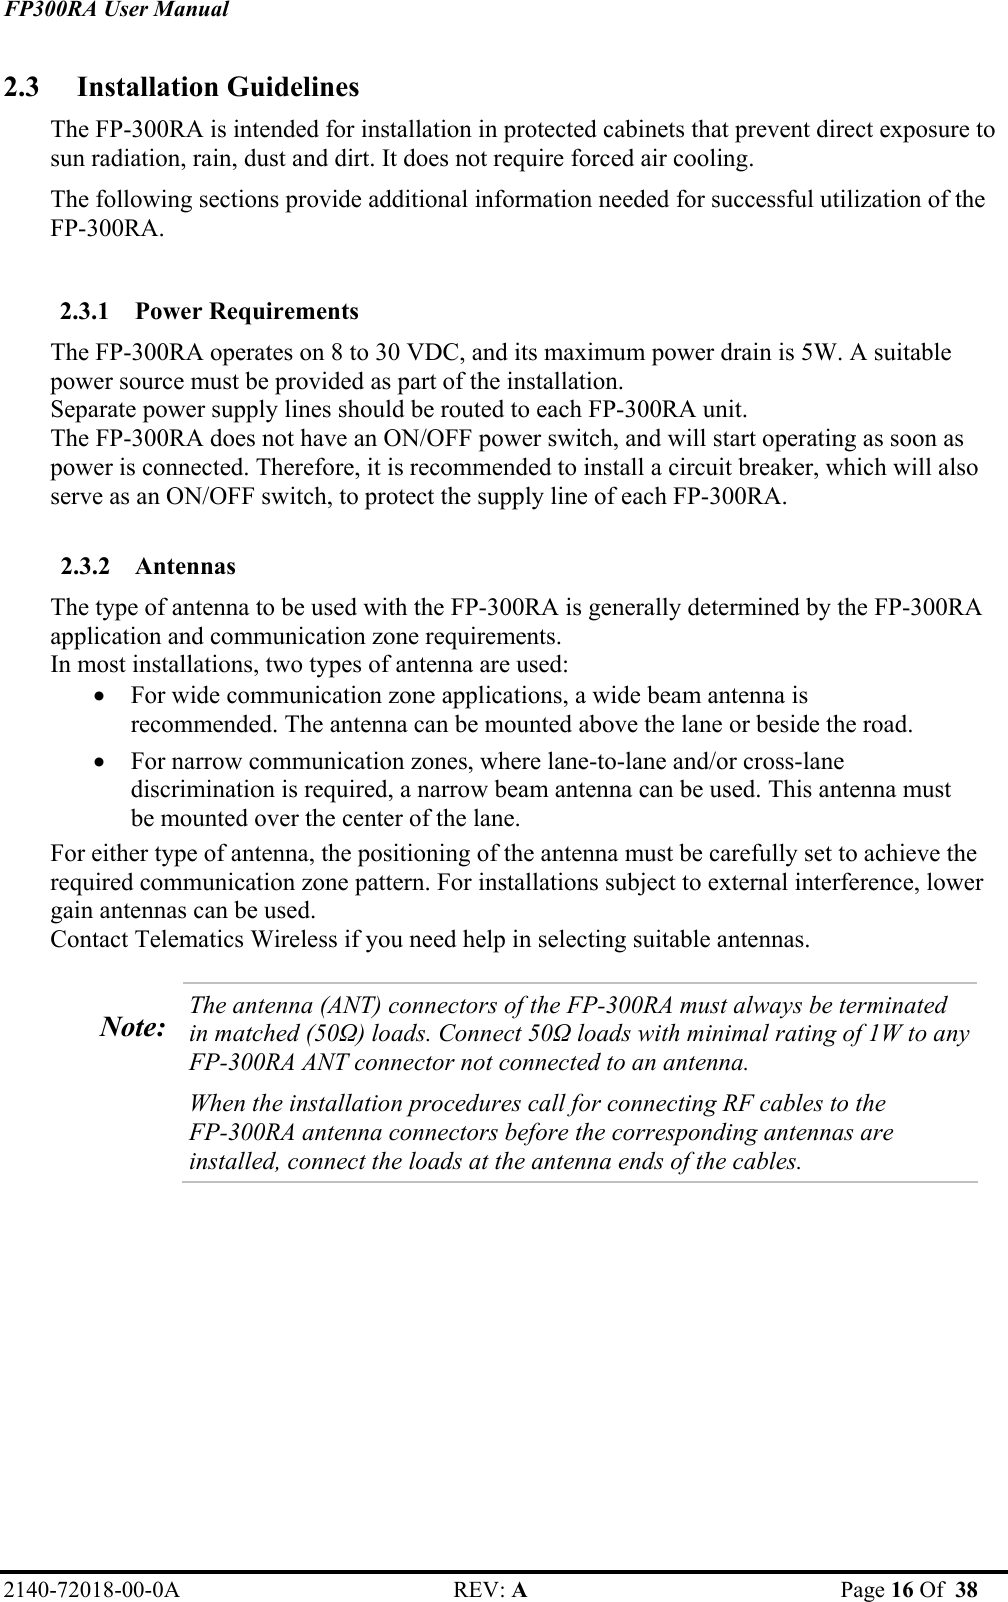 FP300RA User Manual 2140-72018-00-0A REV: A  Page 16 Of  38  2.3 Installation Guidelines The FP-300RA is intended for installation in protected cabinets that prevent direct exposure to sun radiation, rain, dust and dirt. It does not require forced air cooling. The following sections provide additional information needed for successful utilization of the FP-300RA.  2.3.1 Power Requirements The FP-300RA operates on 8 to 30 VDC, and its maximum power drain is 5W. A suitable power source must be provided as part of the installation.  Separate power supply lines should be routed to each FP-300RA unit. The FP-300RA does not have an ON/OFF power switch, and will start operating as soon as power is connected. Therefore, it is recommended to install a circuit breaker, which will also serve as an ON/OFF switch, to protect the supply line of each FP-300RA.  2.3.2 Antennas The type of antenna to be used with the FP-300RA is generally determined by the FP-300RA application and communication zone requirements.  In most installations, two types of antenna are used: • For wide communication zone applications, a wide beam antenna is recommended. The antenna can be mounted above the lane or beside the road. • For narrow communication zones, where lane-to-lane and/or cross-lane discrimination is required, a narrow beam antenna can be used. This antenna must be mounted over the center of the lane.  For either type of antenna, the positioning of the antenna must be carefully set to achieve the required communication zone pattern. For installations subject to external interference, lower gain antennas can be used. Contact Telematics Wireless if you need help in selecting suitable antennas.  Note:  The antenna (ANT) connectors of the FP-300RA must always be terminated in matched (50Ω) loads. Connect 50Ω loads with minimal rating of 1W to any FP-300RA ANT connector not connected to an antenna.  When the installation procedures call for connecting RF cables to the  FP-300RA antenna connectors before the corresponding antennas are installed, connect the loads at the antenna ends of the cables.   